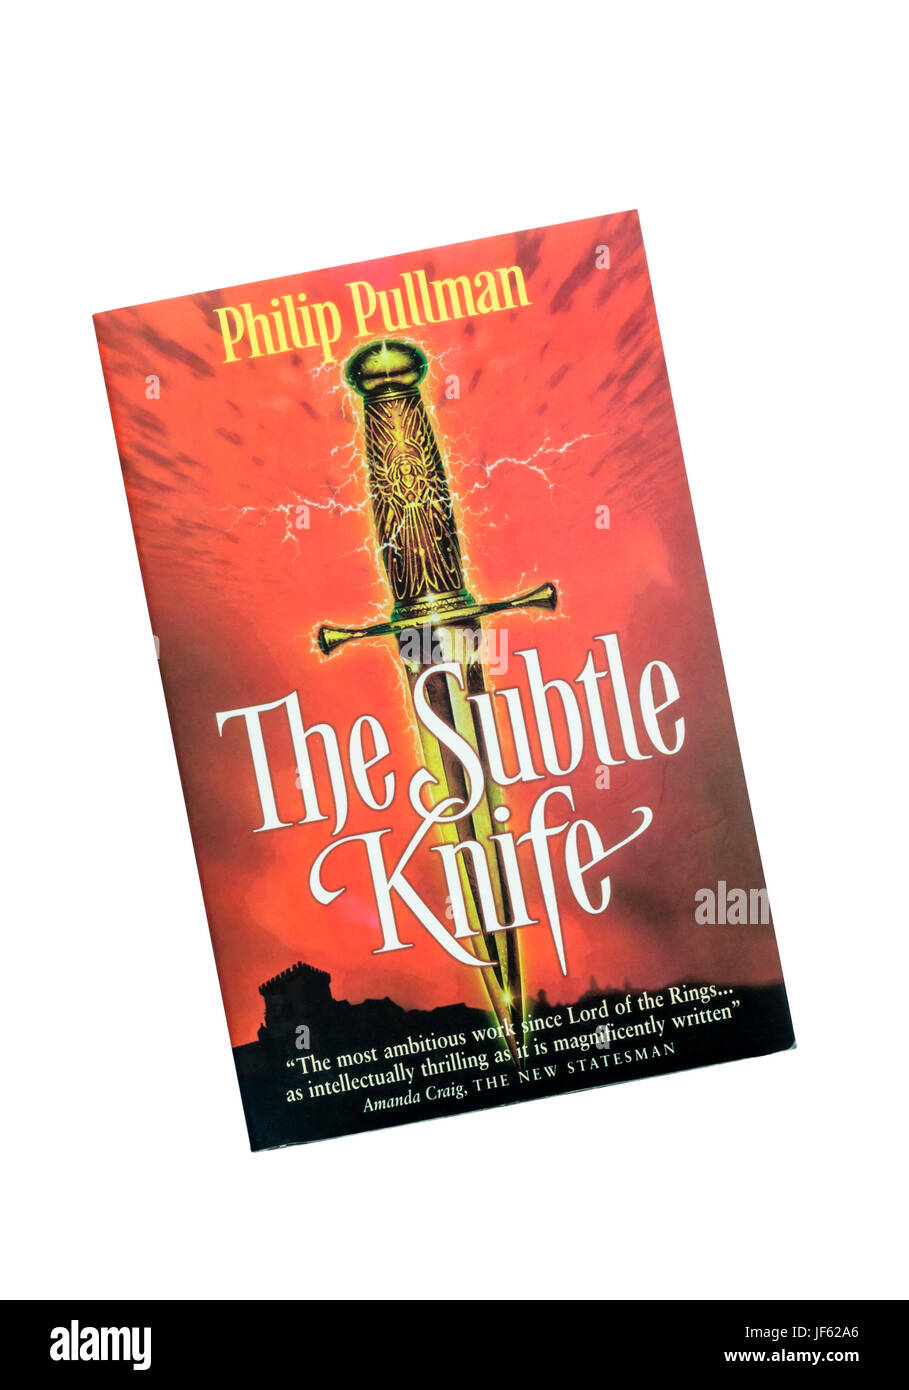 The Subtle Knife by Philip Pullman is the second in the His Dark Materials trilogy. First published in 1997. Stock Photo